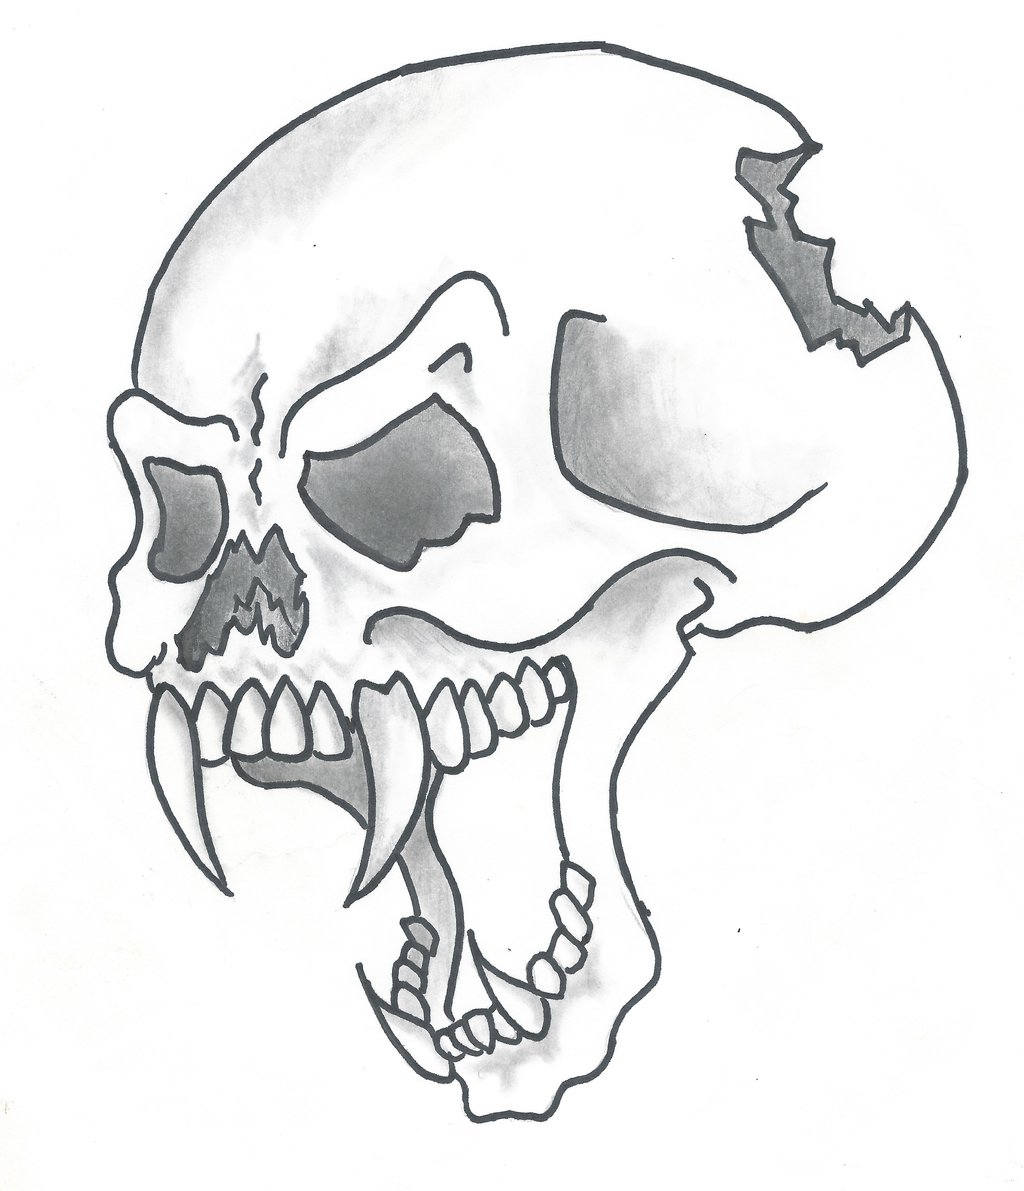 Pictures Of Drawings Of Skulls | Free Download Clip Art | Free ...